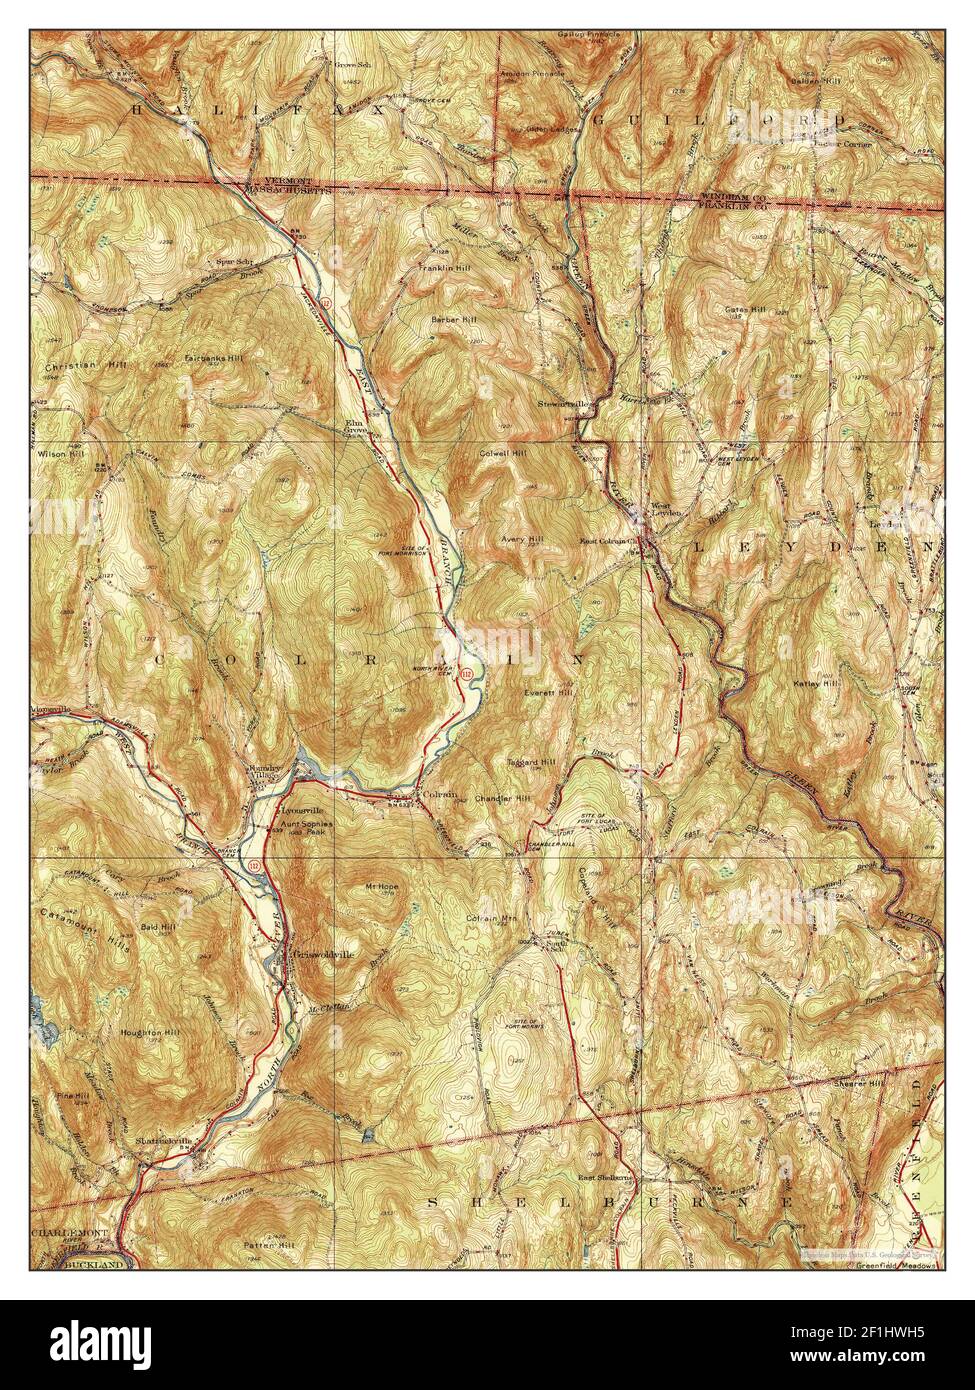 Colrain, Massachusetts, map 1946, 1:31680, United States of America by Timeless Maps, data U.S. Geological Survey Stock Photo